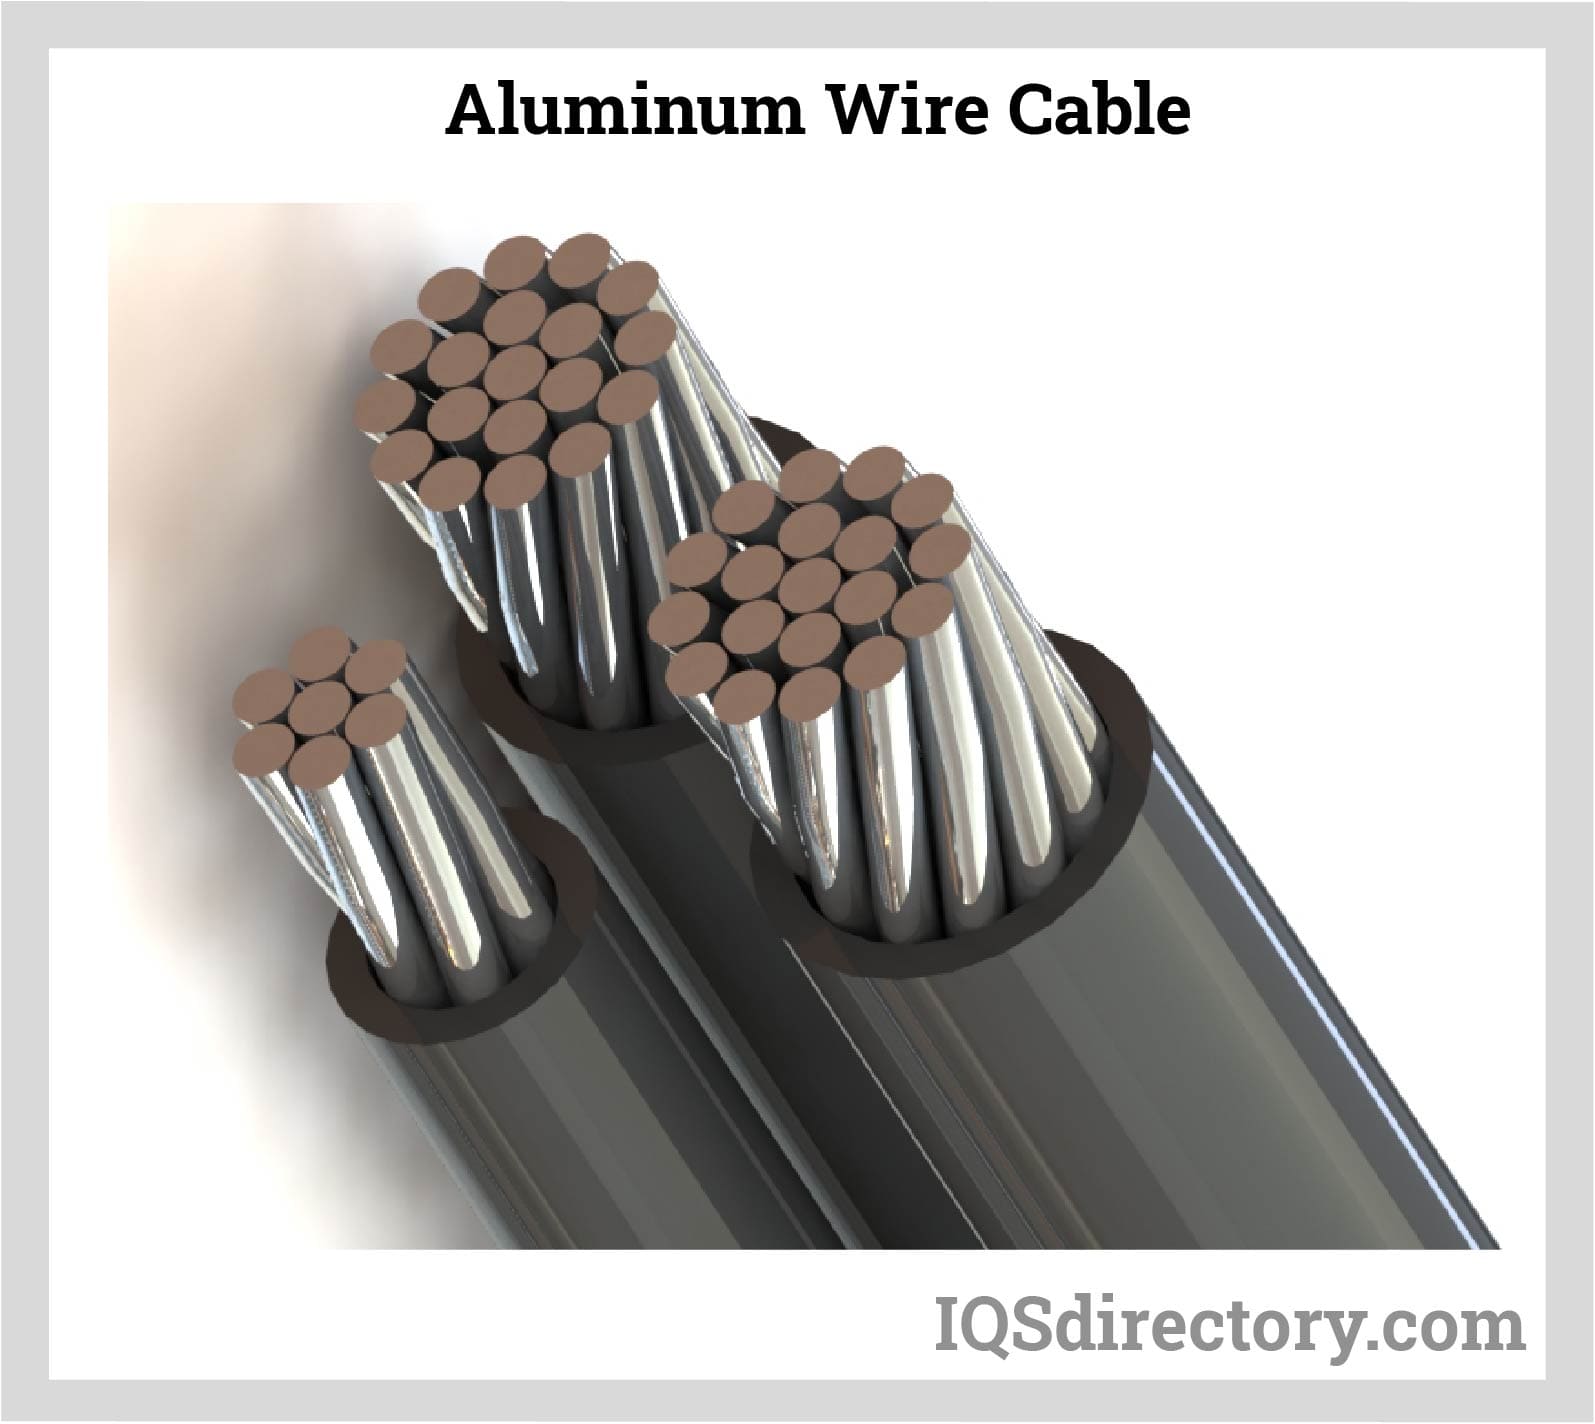 Aluminum Wire Cable